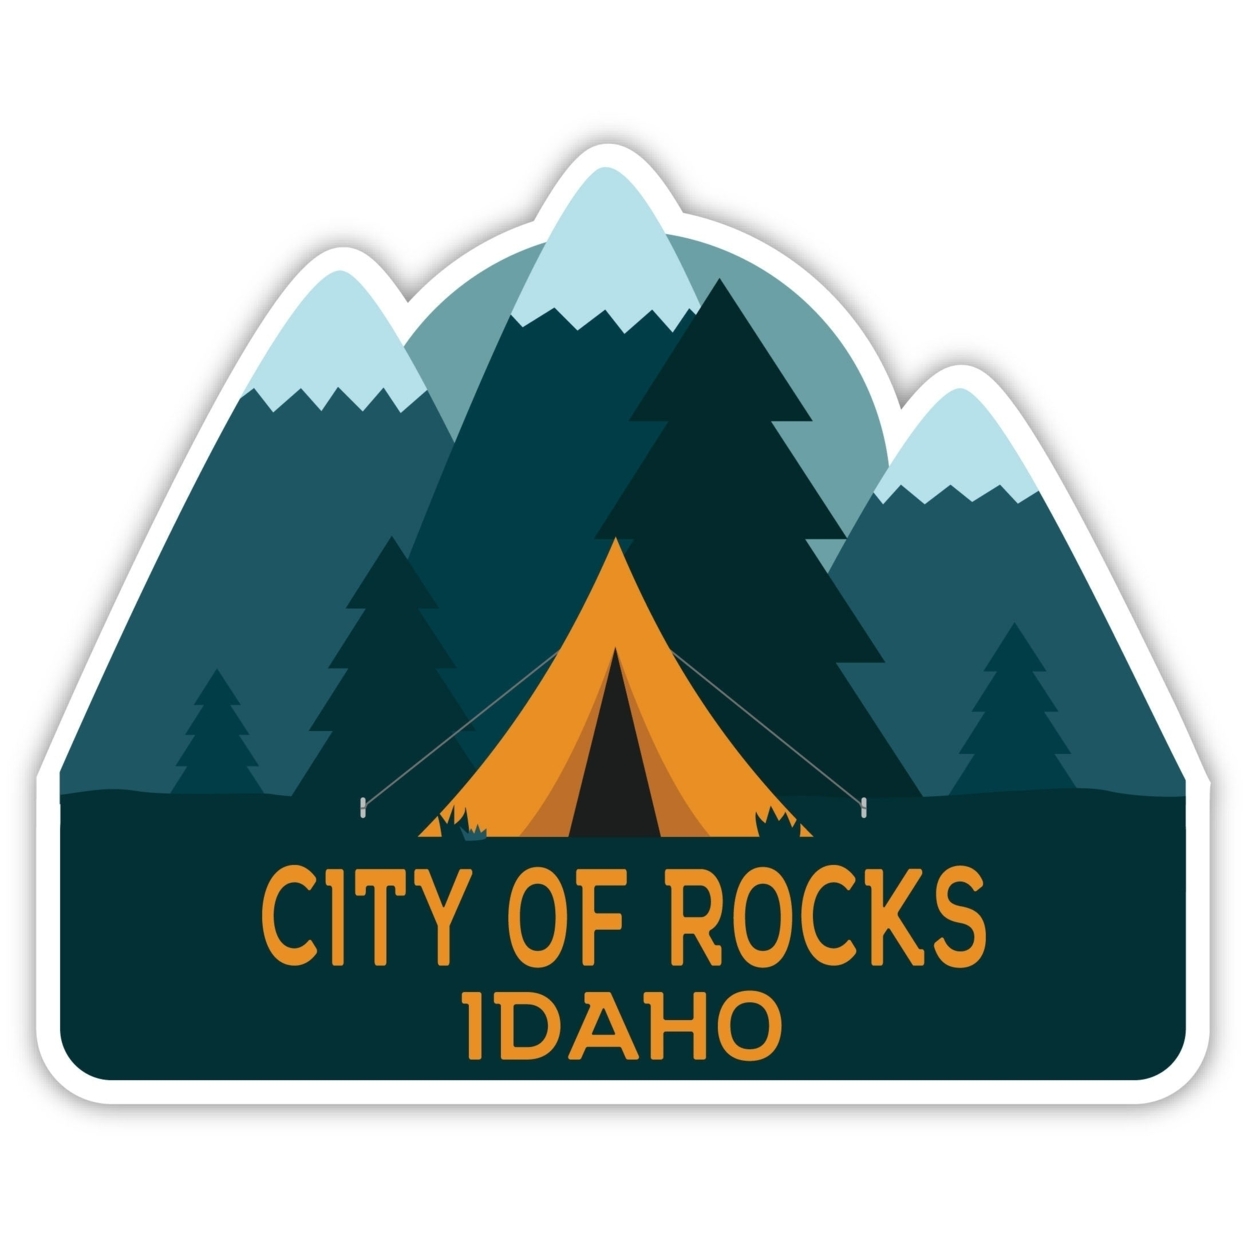 City Of Rocks Idaho Souvenir Decorative Stickers (Choose Theme And Size) - 4-Pack, 10-Inch, Bear